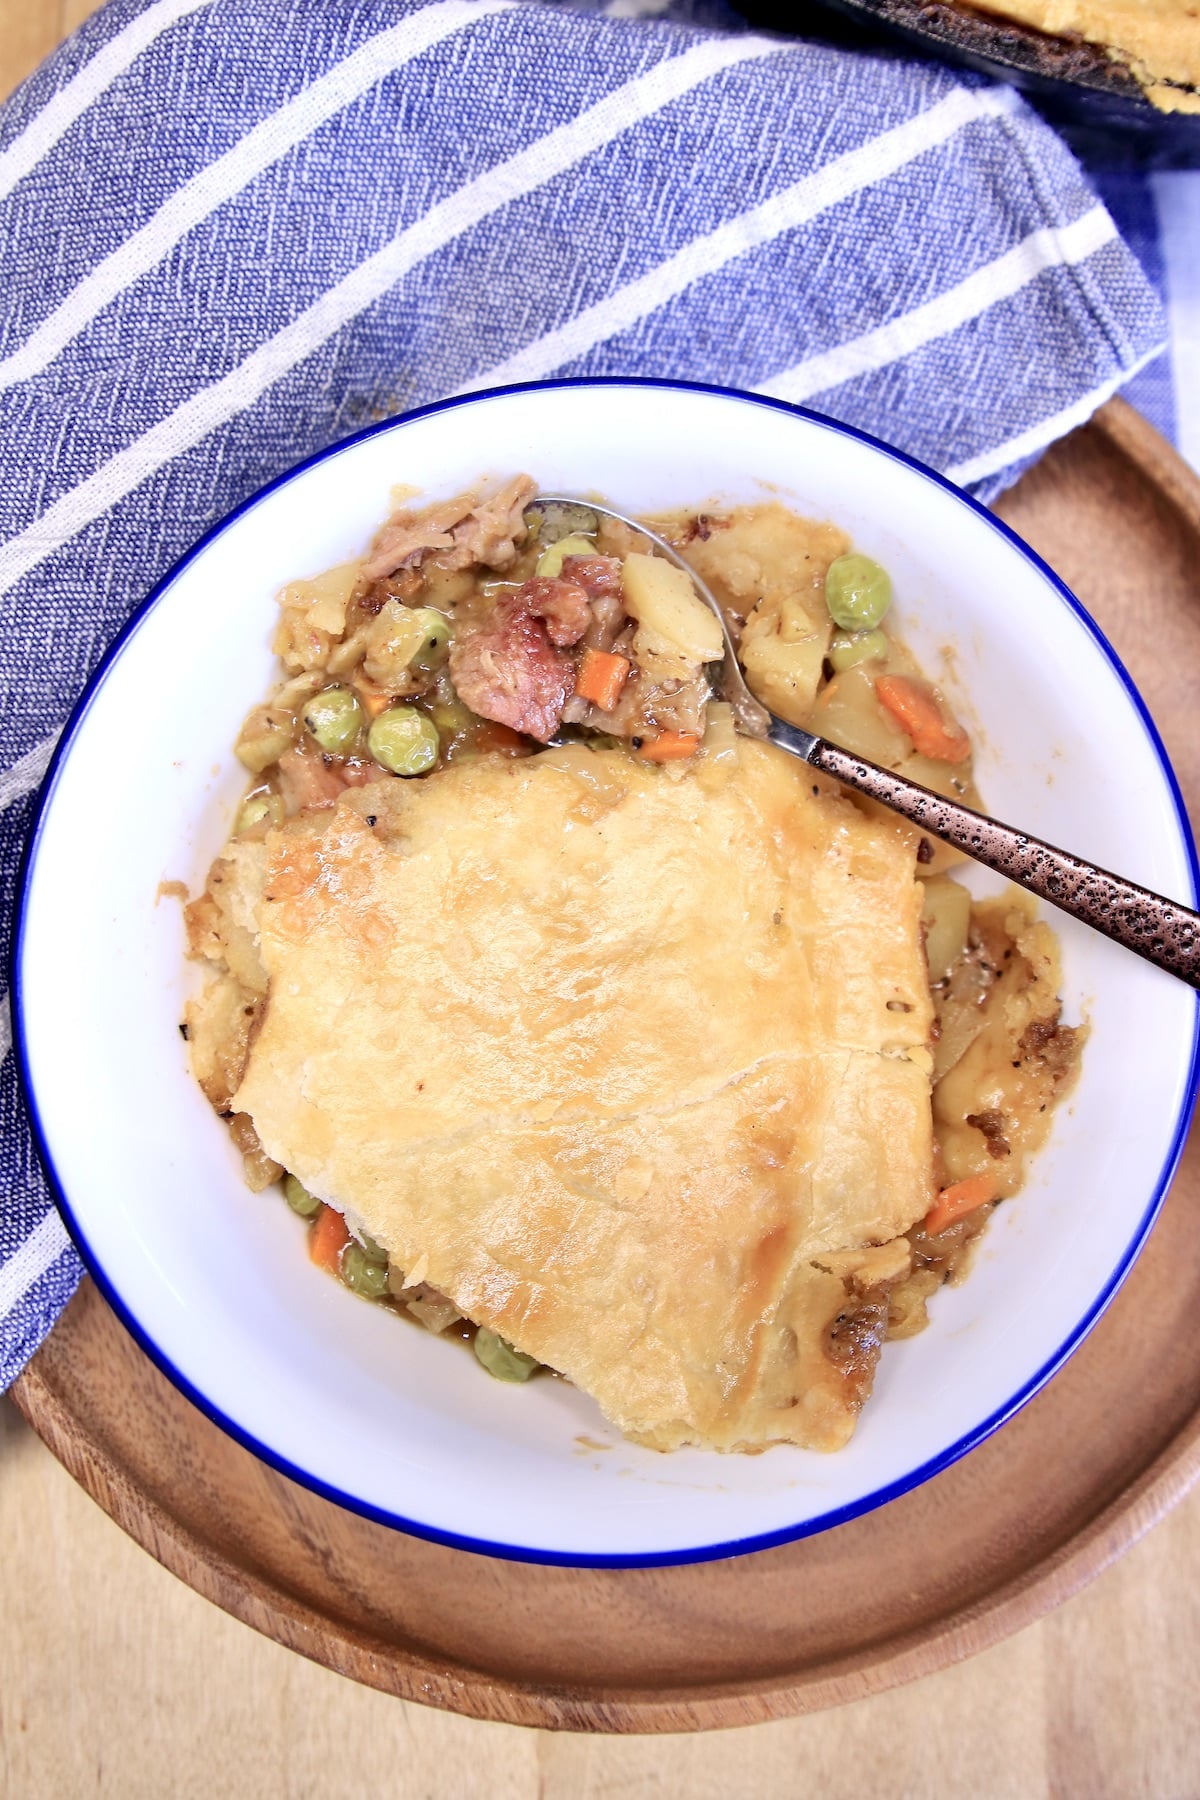 Bowl of pot pie with spoon.